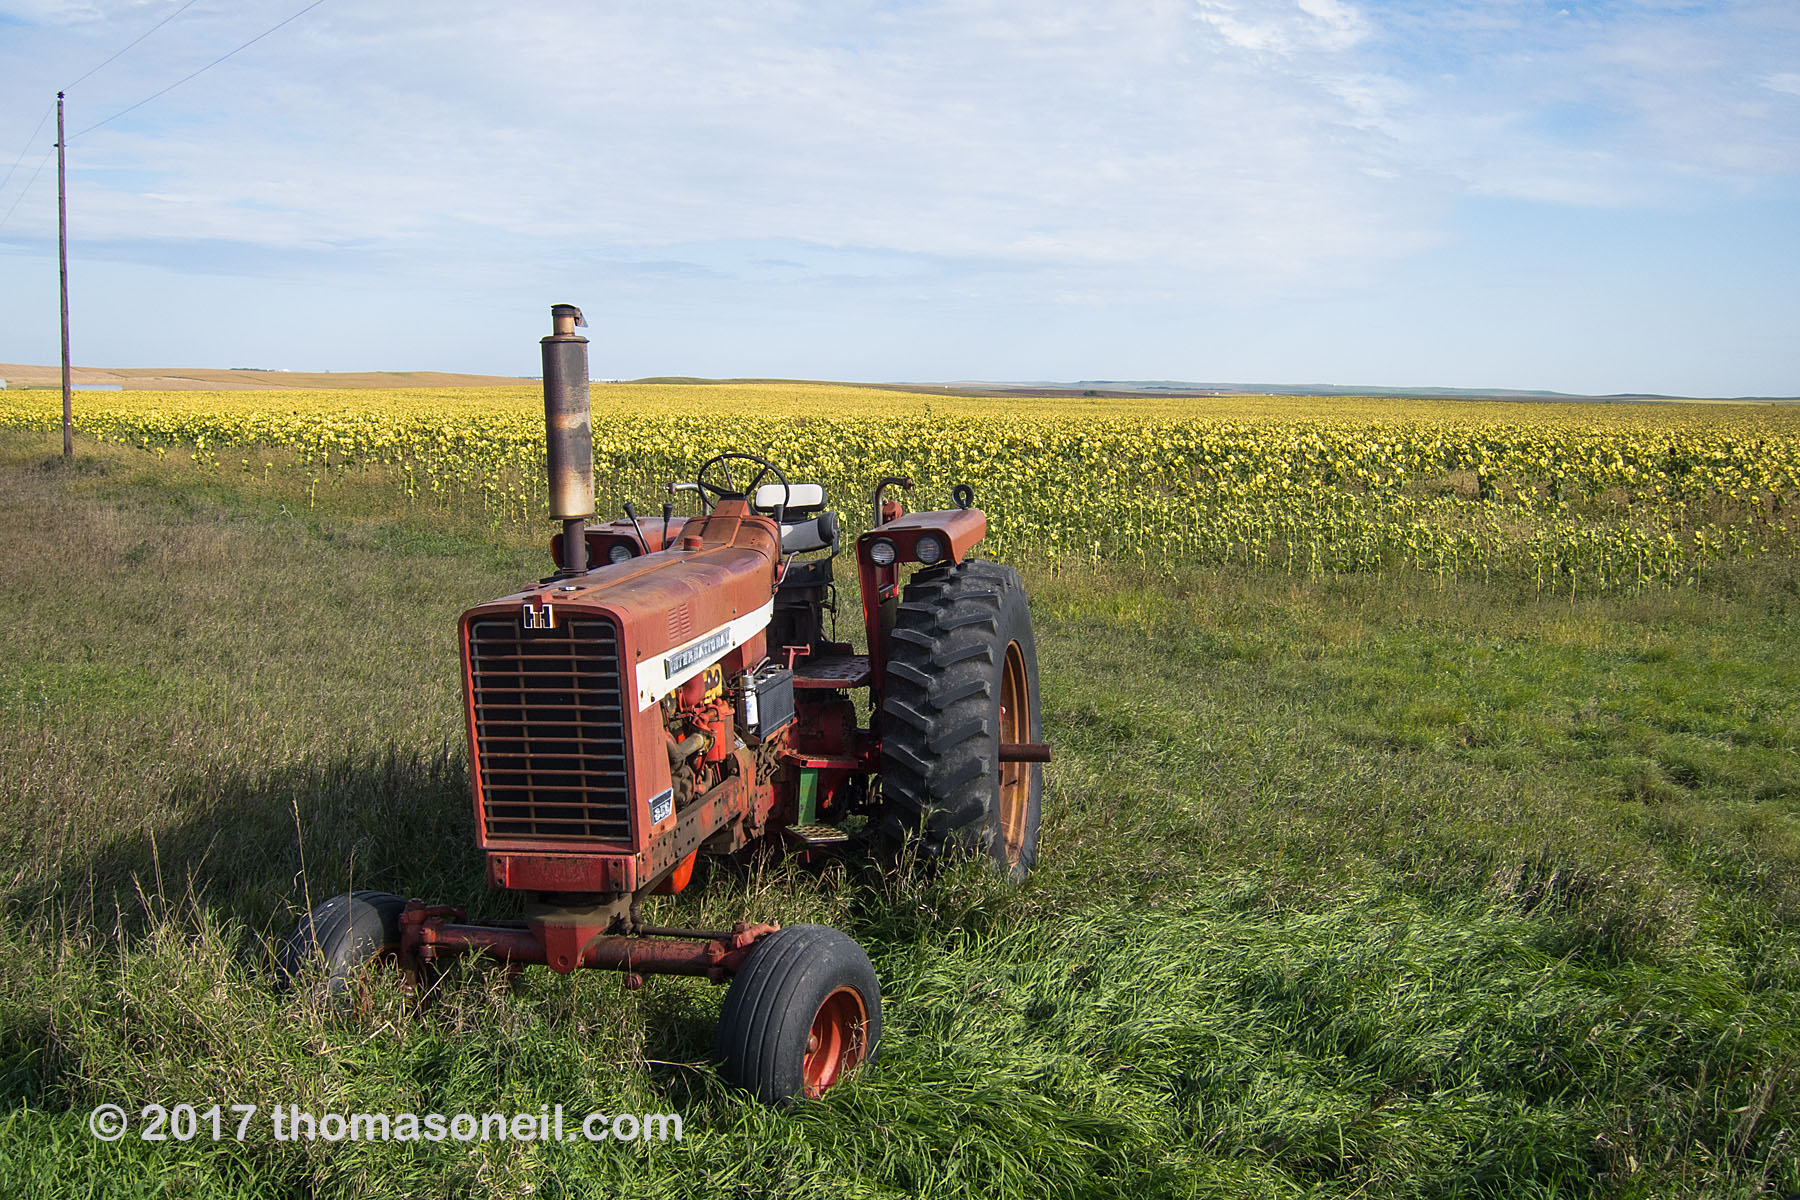 On the drive home found this IH tractor rusting out next to a sunflower field near Vivian, South Dakota, September 2017.  Click for next photo.